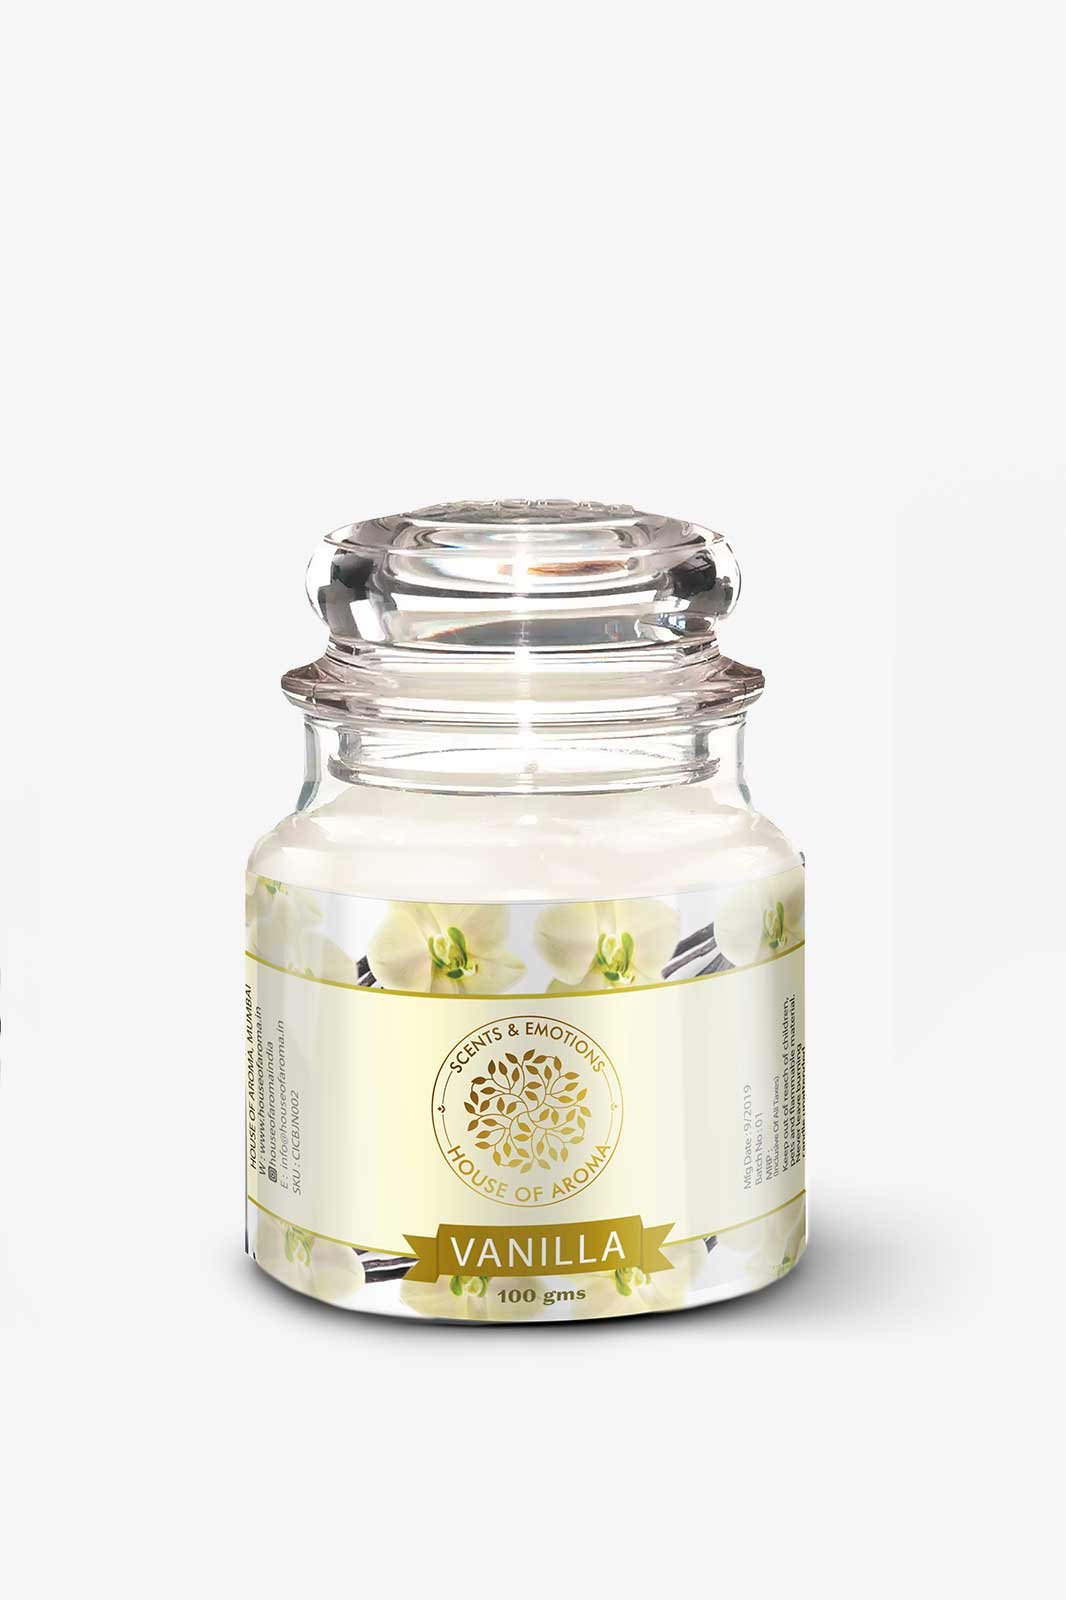 vanilla bell jar candle, scented candle vanilla, vanilla almond candle, vanilla amber candle, vanilla birch vanilla bell jar candle, scented candle vanilla, vanilla almond candle, vanilla amber candle, vanilla birch candle, vanilla candle amazon, vanilla candle and diffuser set, vanilla candle best, vanilla candle fragrance, vanilla candle gift, House of Aroma, scented candles online, home decor scented candles, organic scented candles,